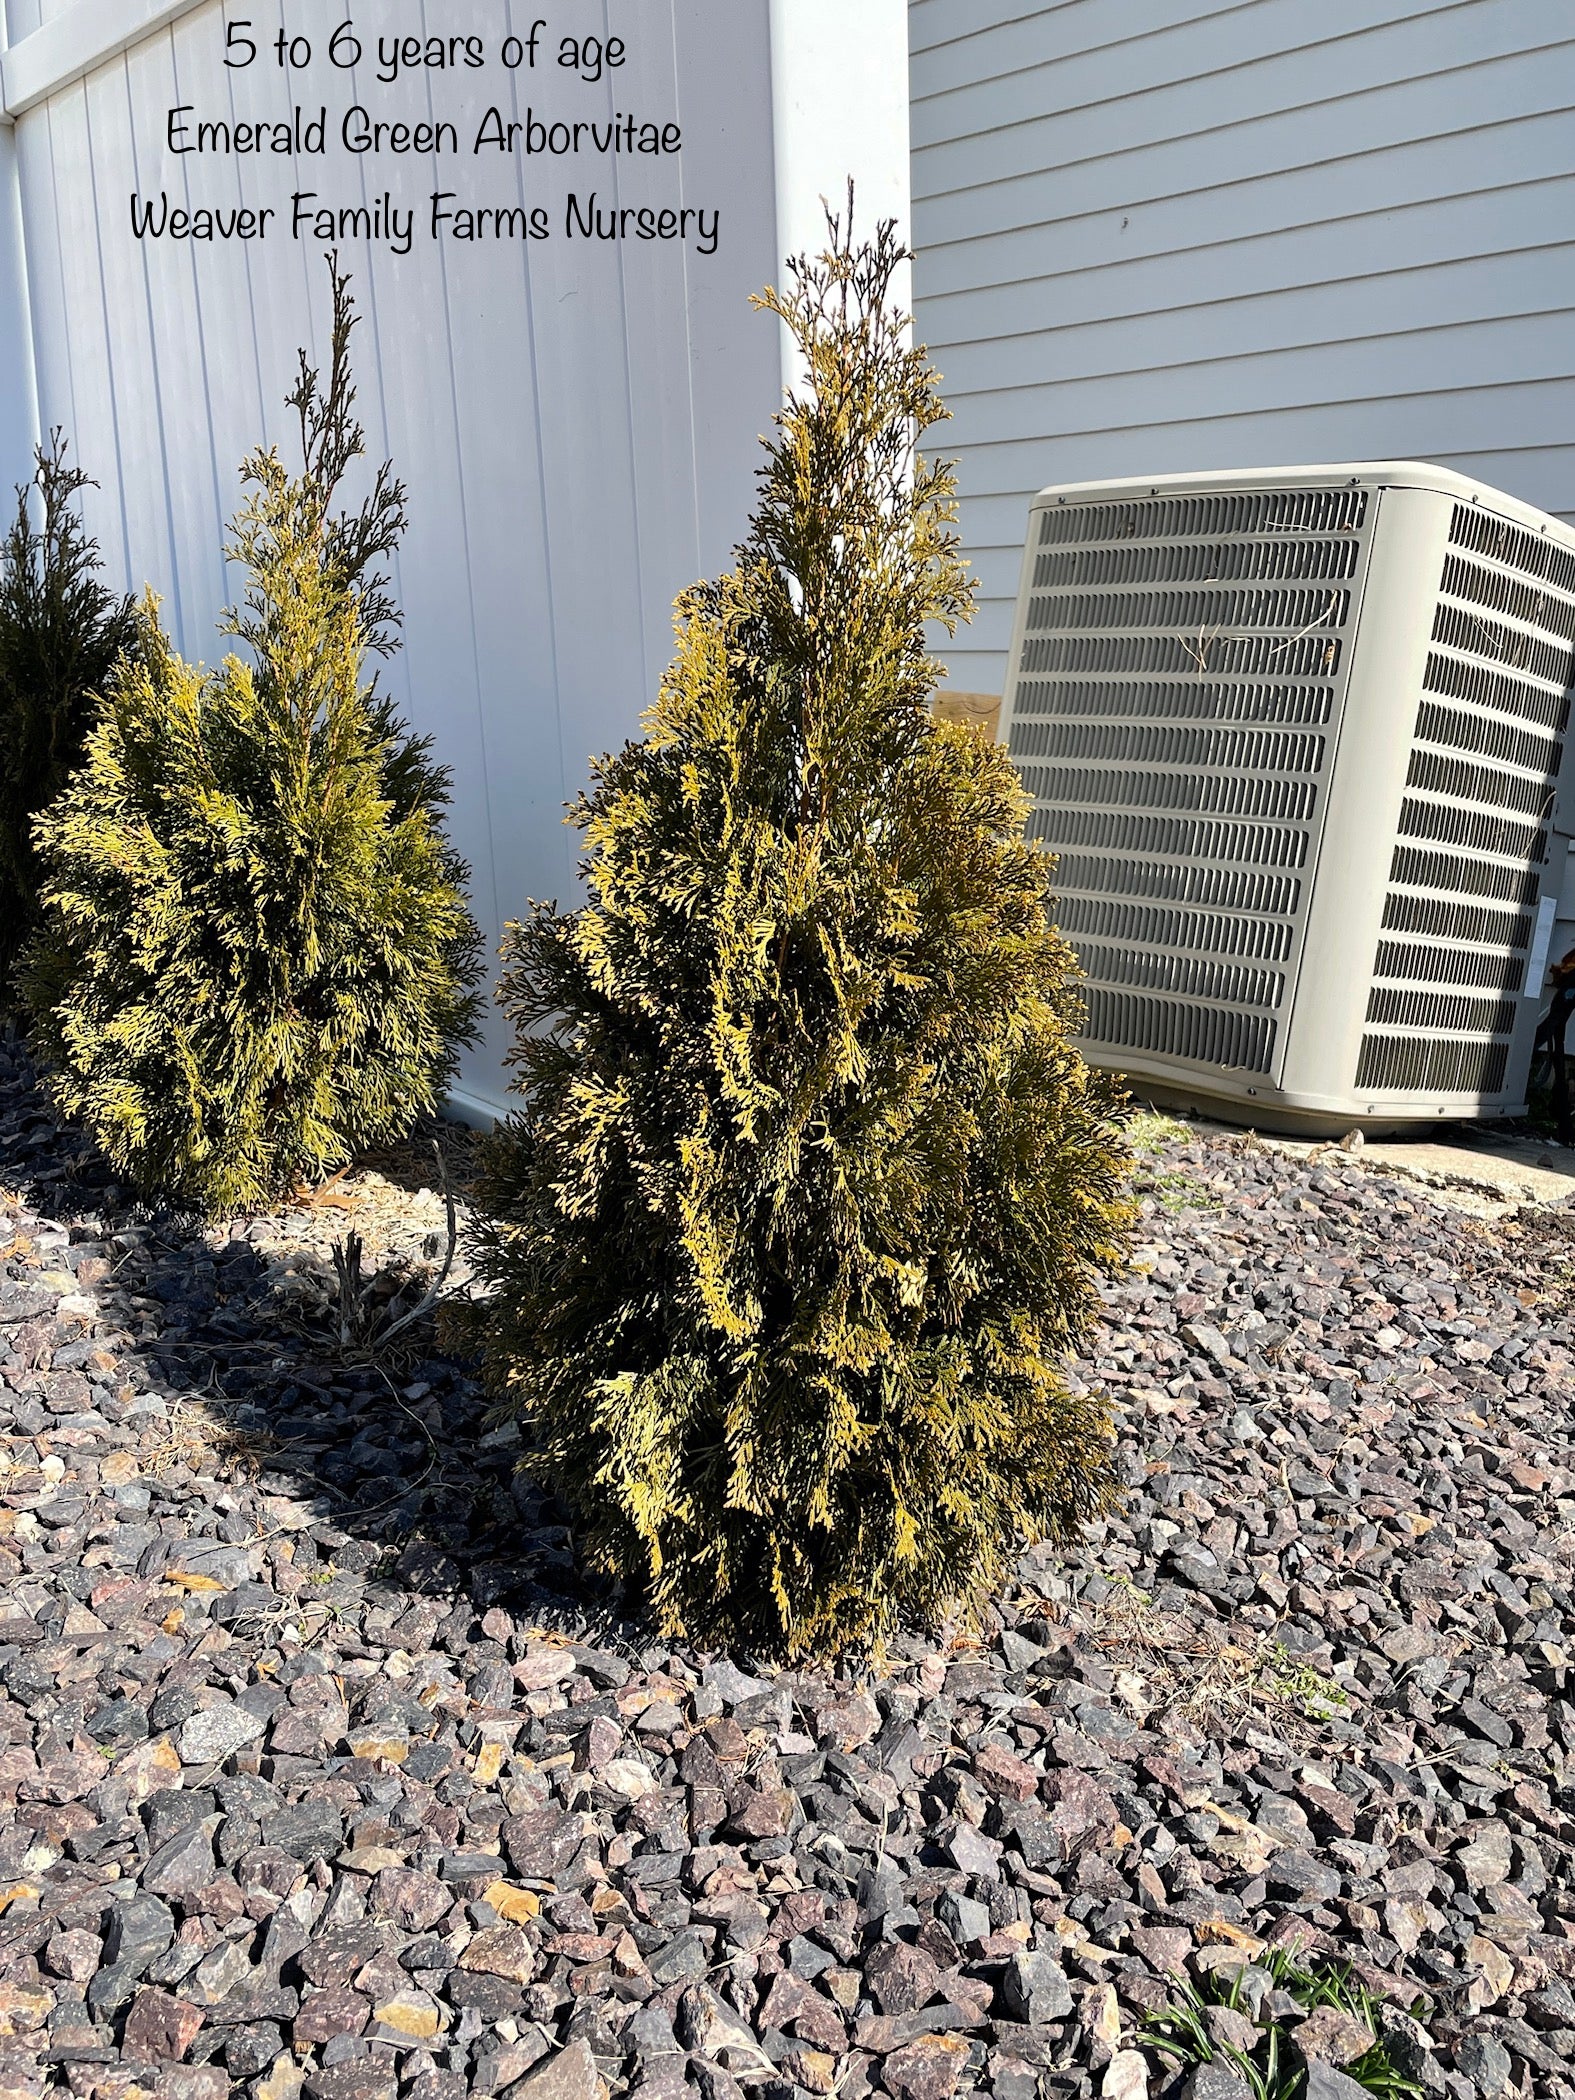 Landscaping project featuring Emerald Green Arborvitae for drought-tolerant, low-maintenance garden solutions. 5-6 year old